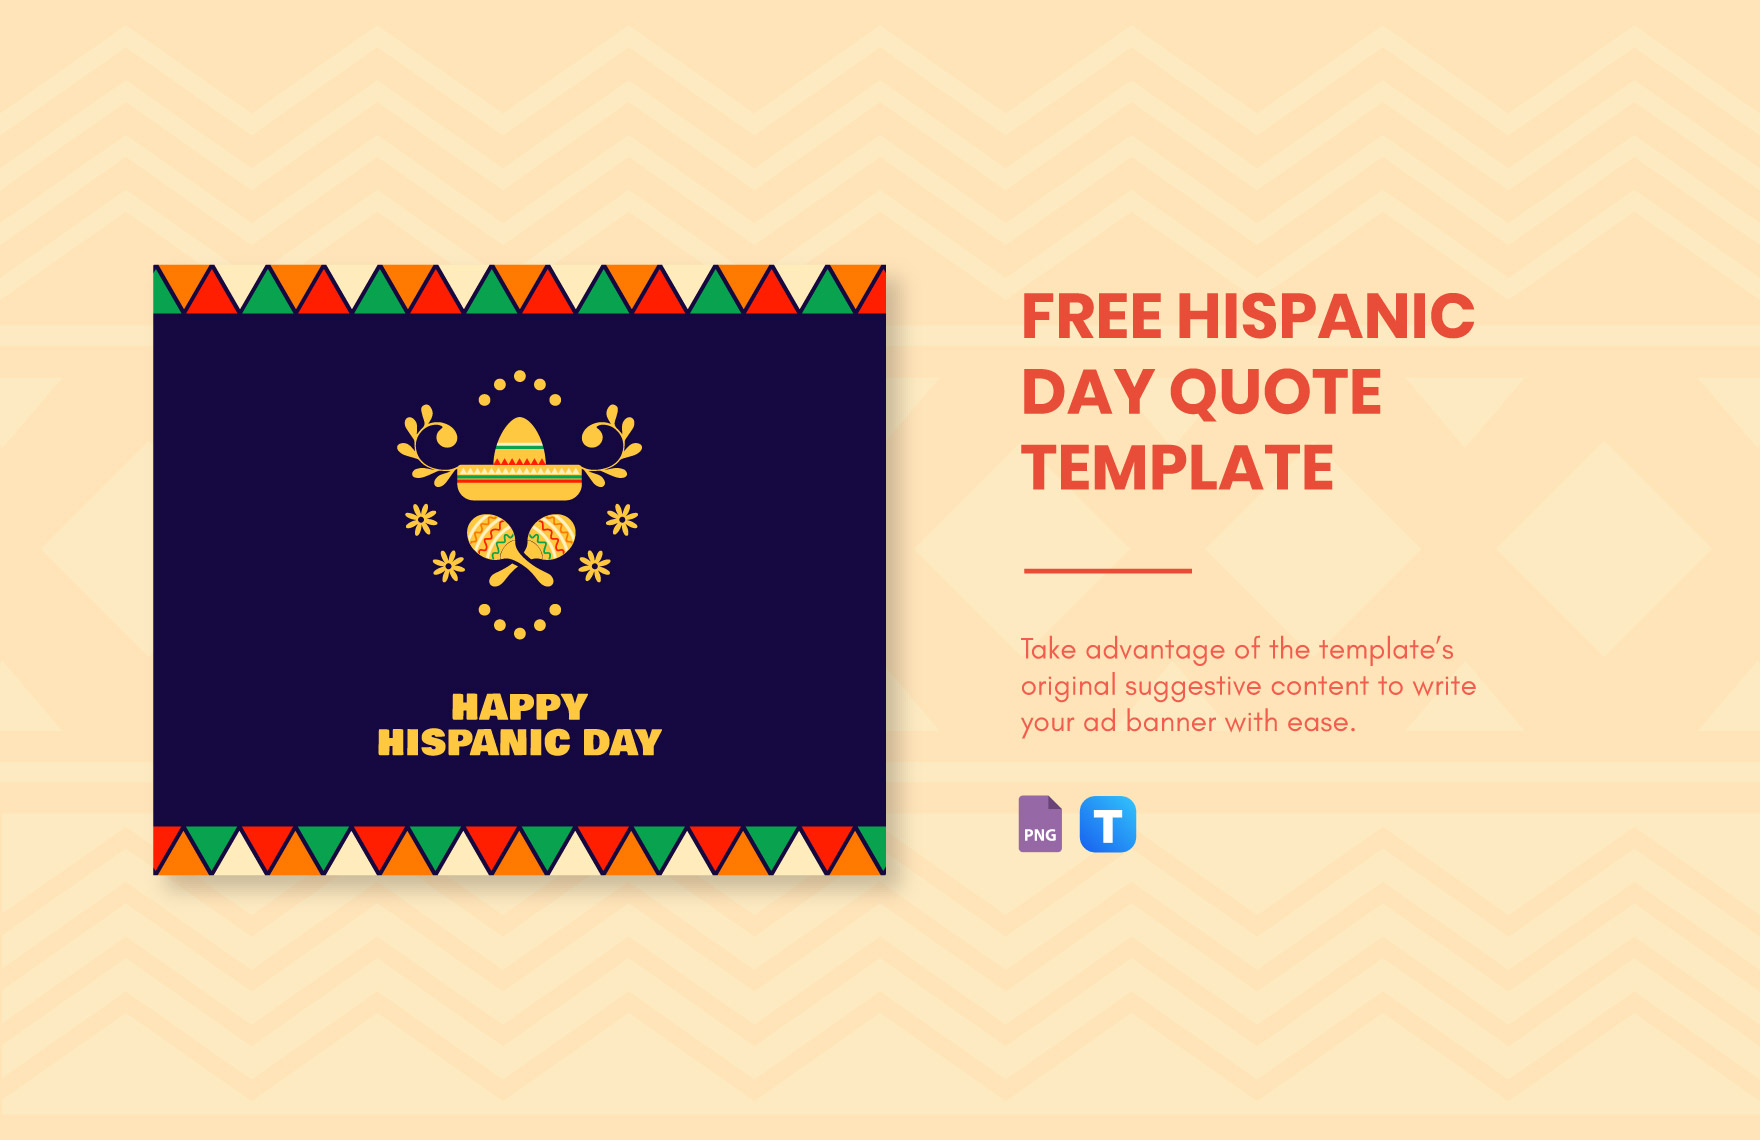 Free Hispanic Day Ad Banner Template in PNG